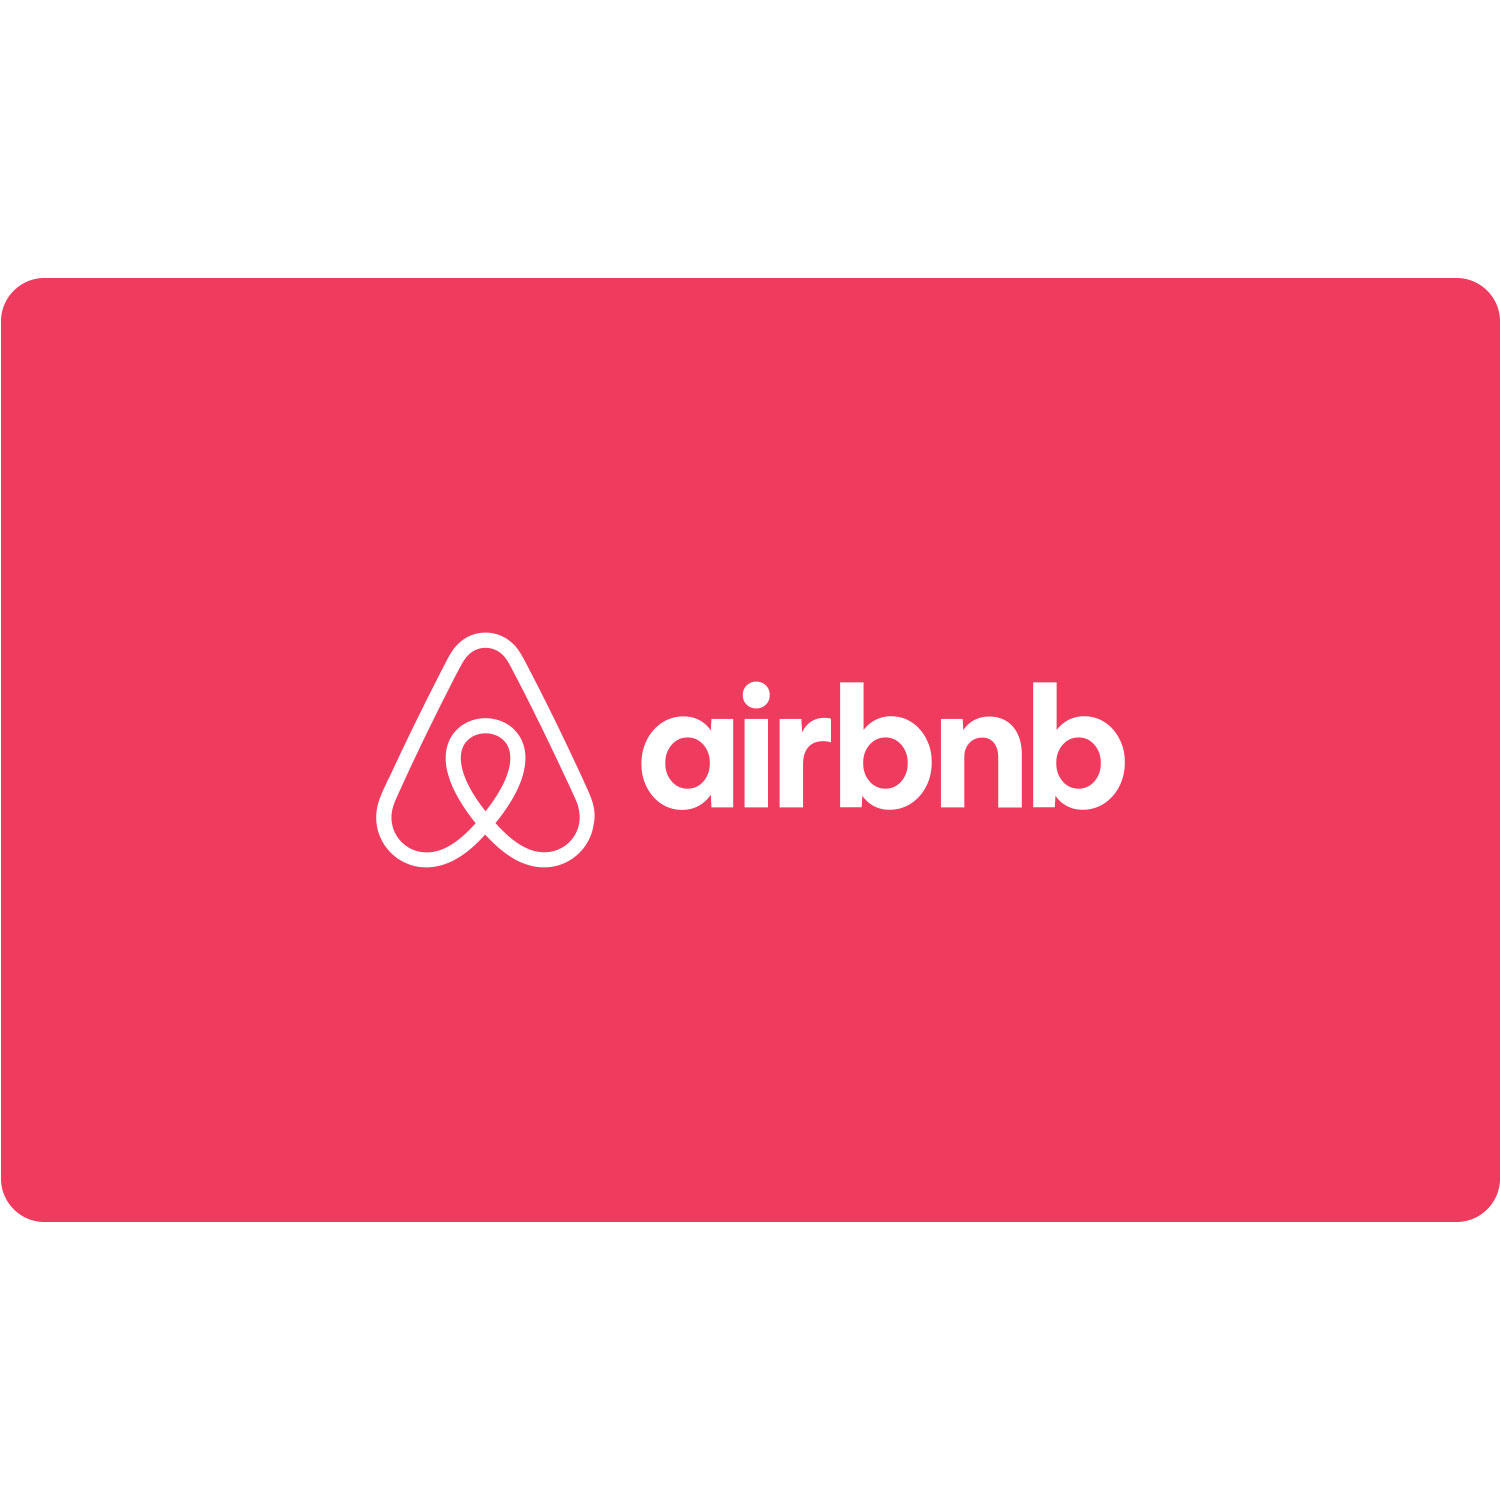 Airbnb $500 Value eGift Card (Email Delivery)